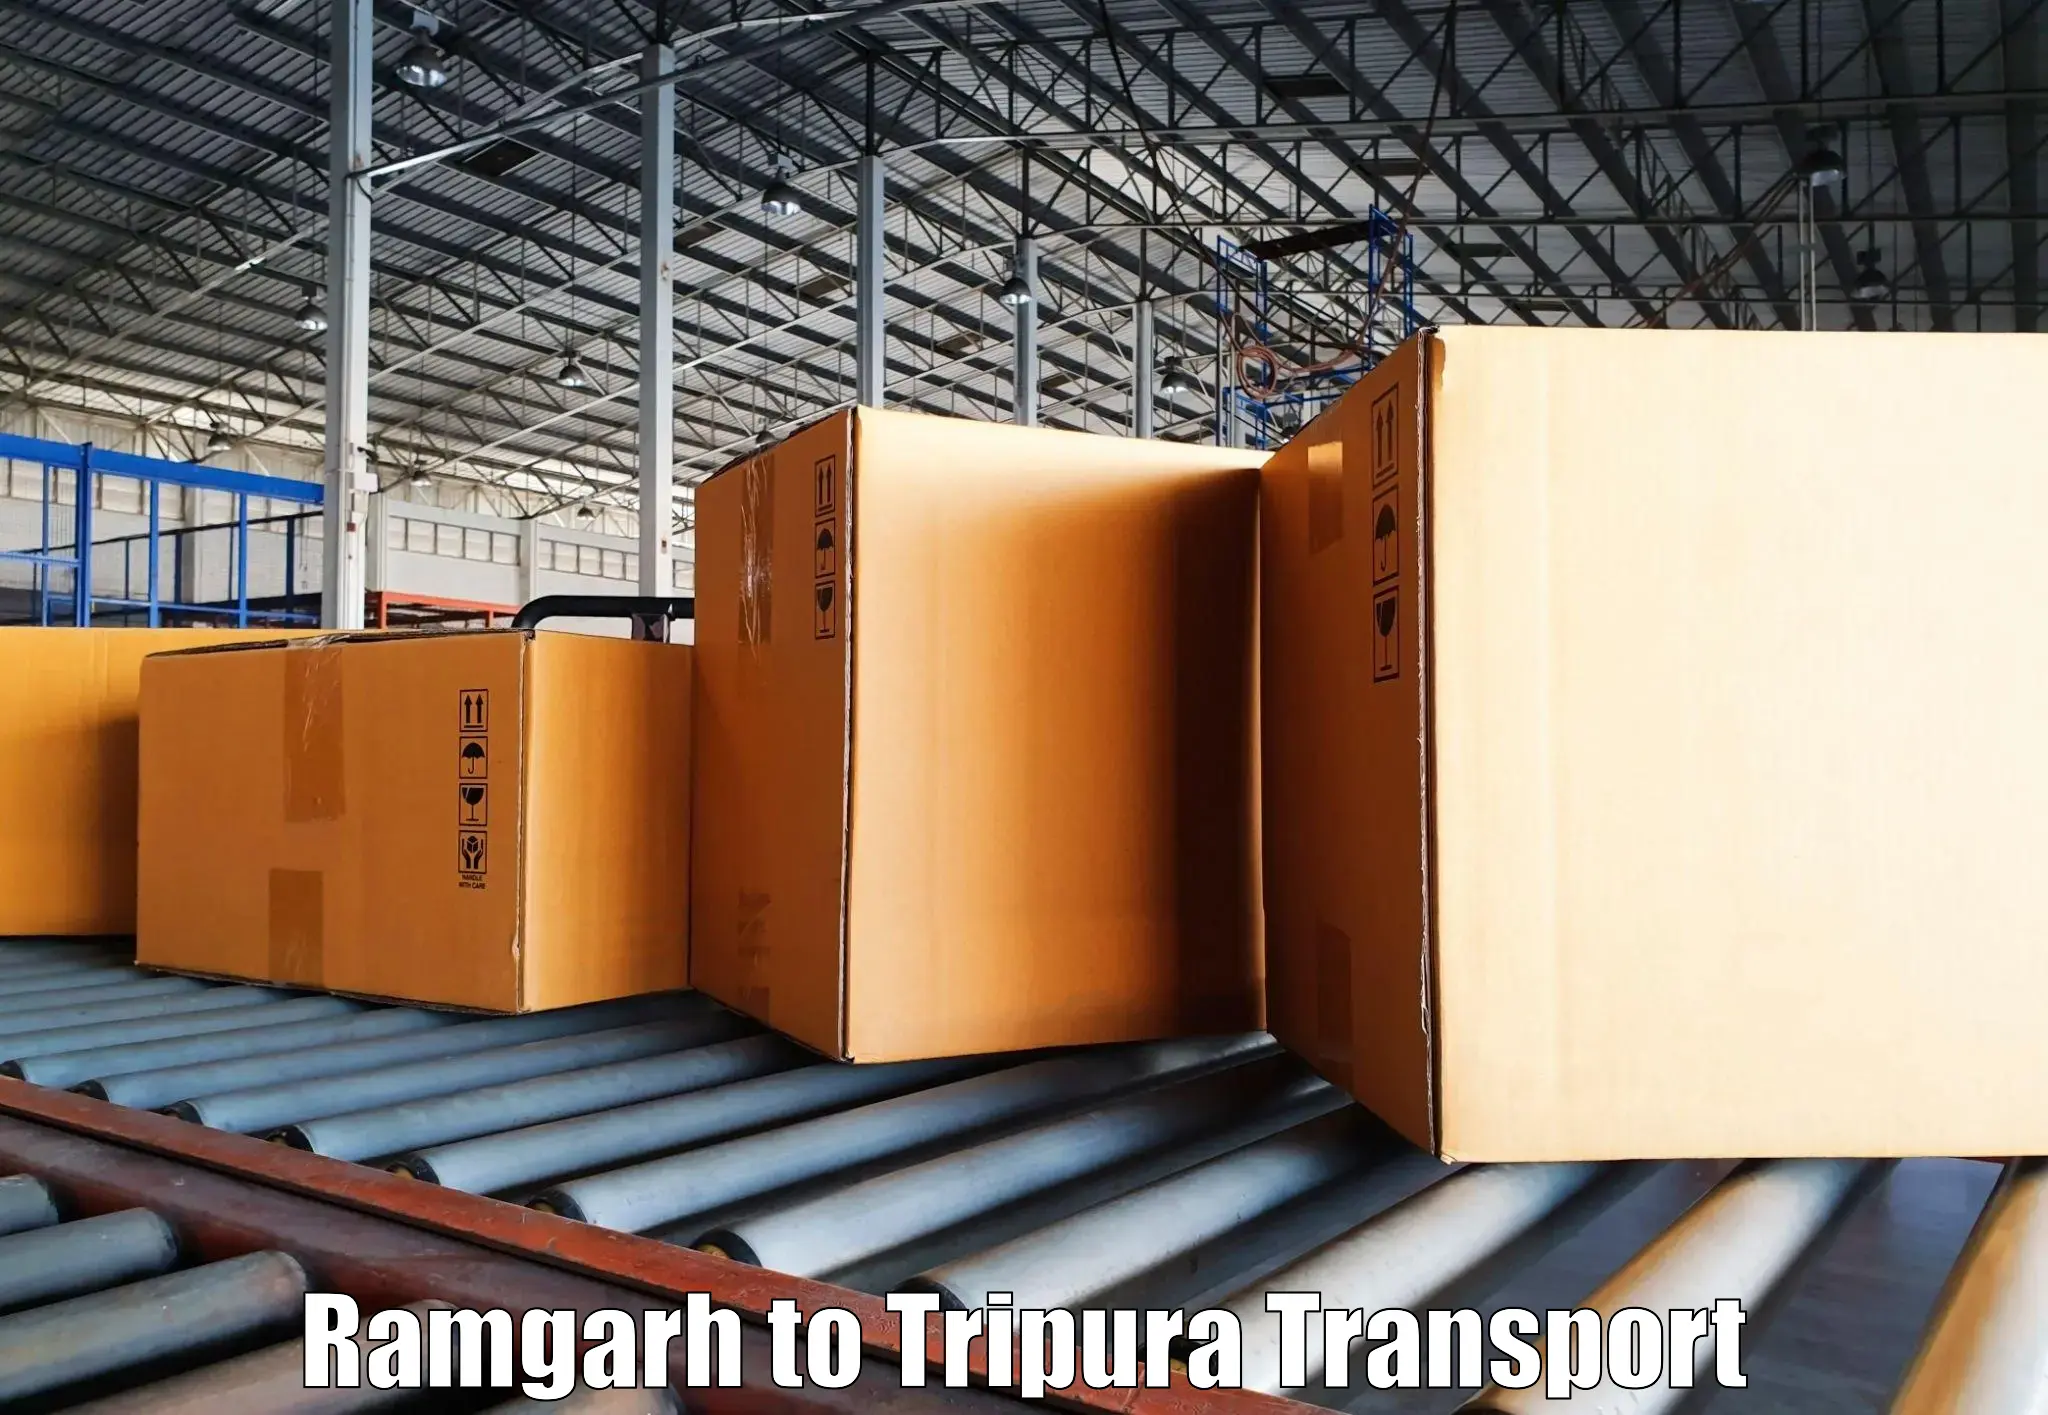 Cargo transport services Ramgarh to Udaipur Tripura